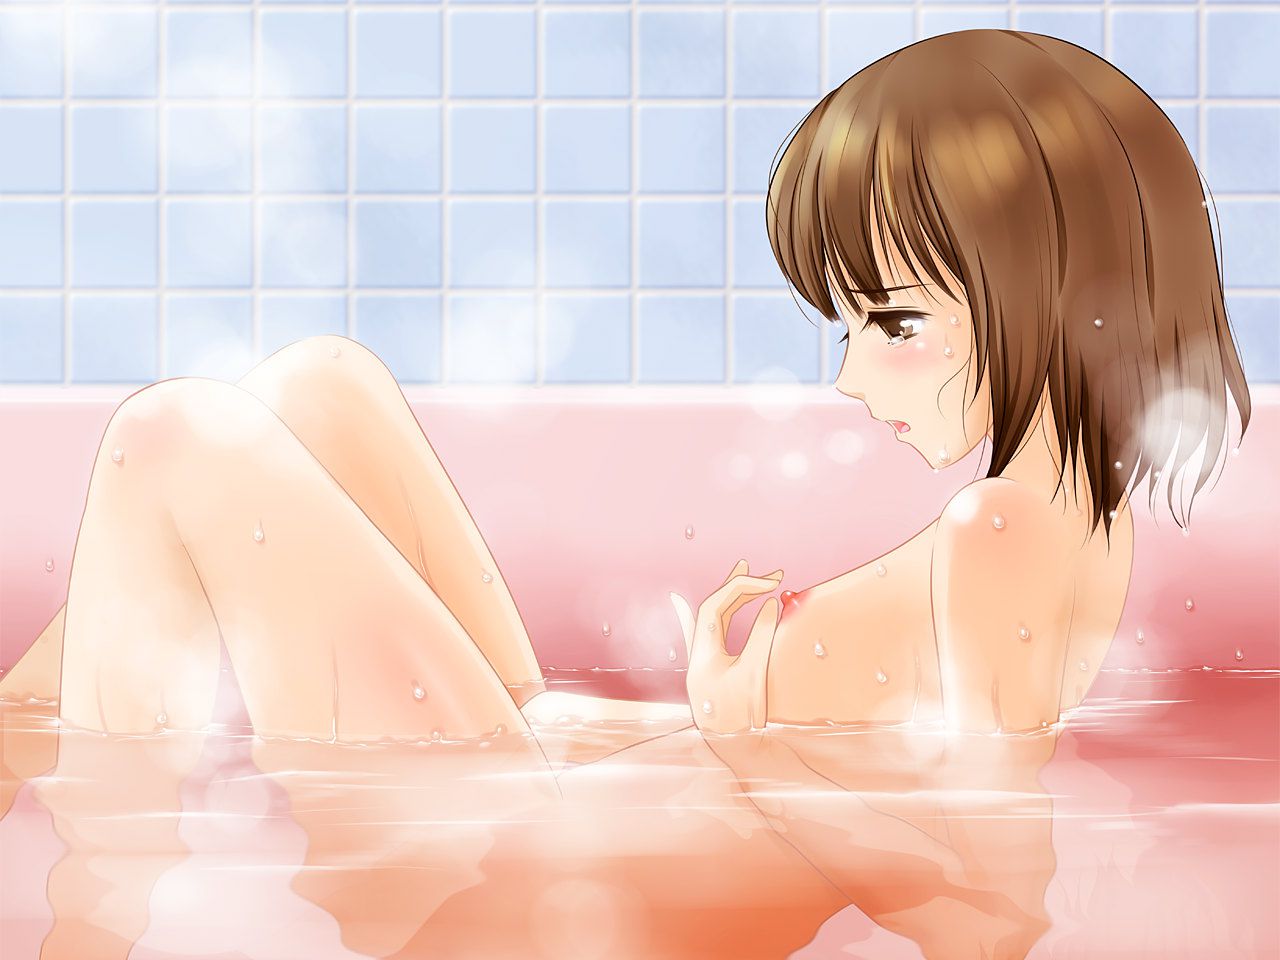 【Erotic Anime Summary】 Erotic image of a girl getting comfortable with masturbation 【Secondary erotic】 22